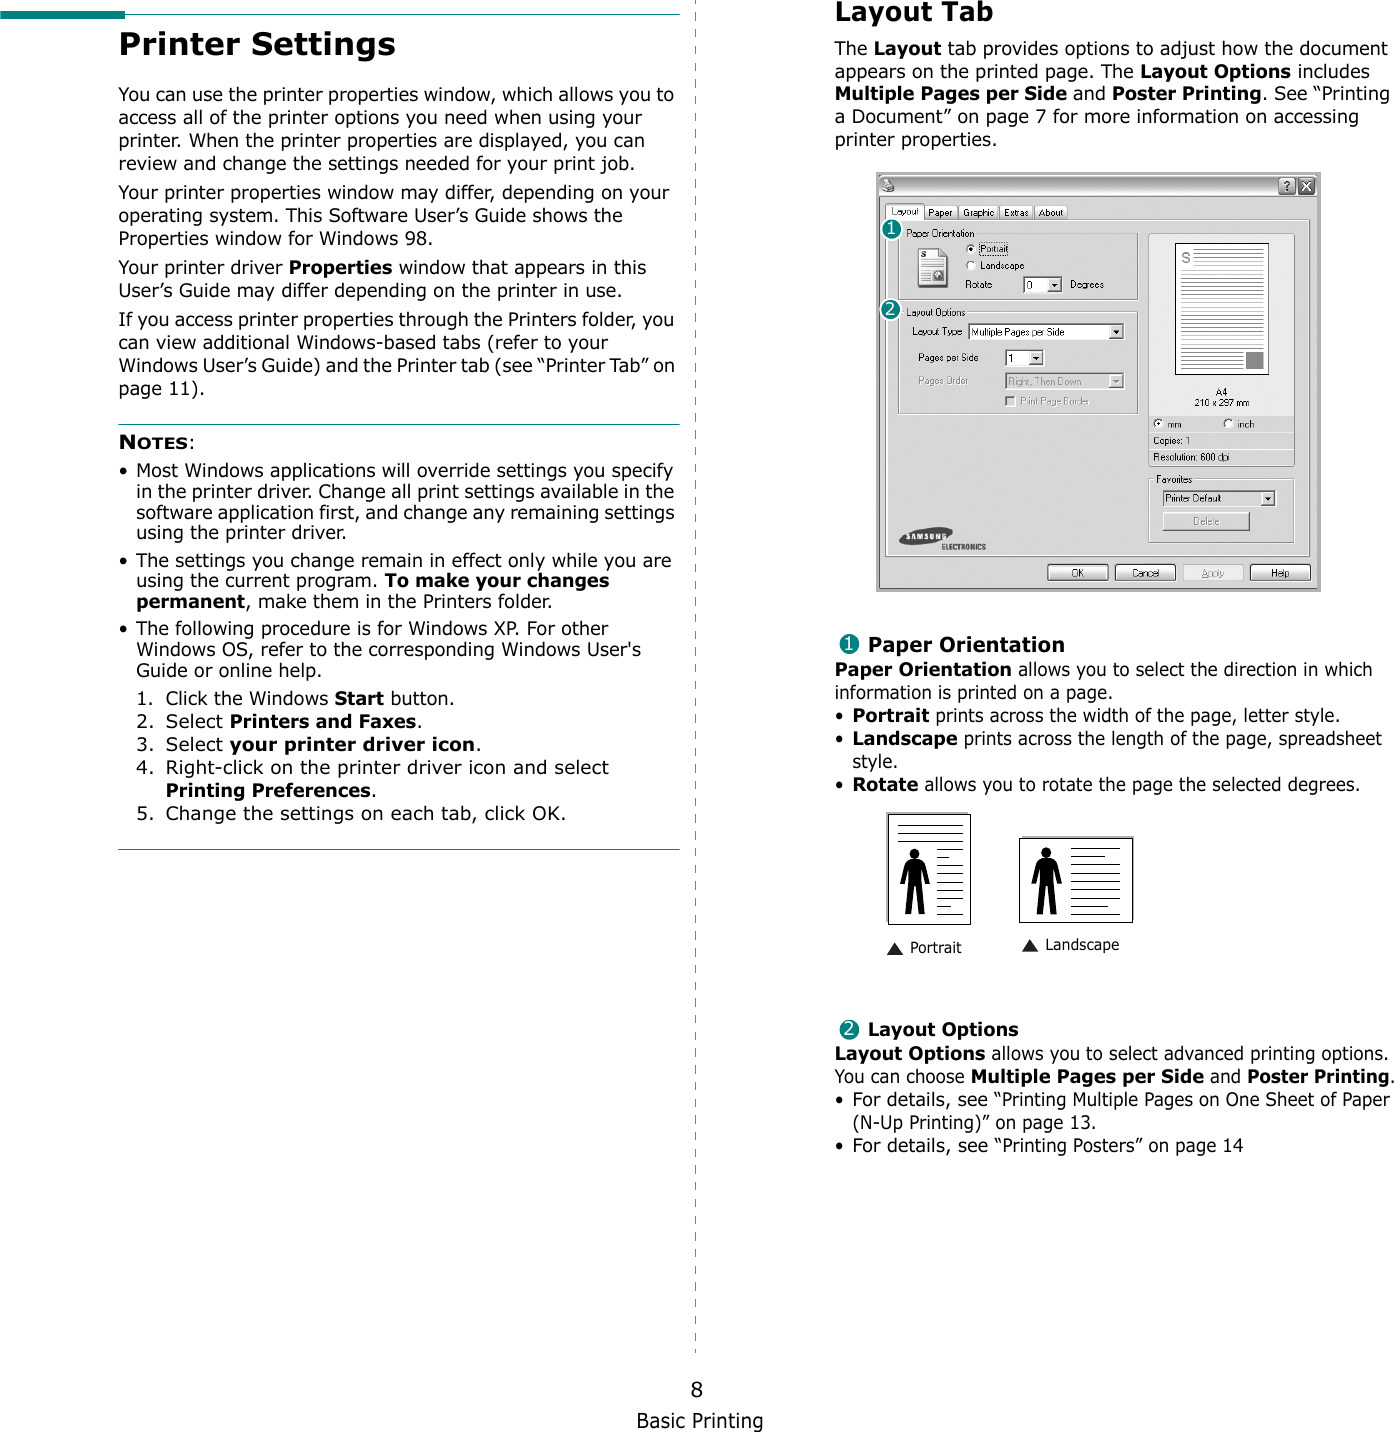 Basic Printing8Printer SettingsYou can use the printer properties window, which allows you to access all of the printer options you need when using your printer. When the printer properties are displayed, you can review and change the settings needed for your print job. Your printer properties window may differ, depending on your operating system. This Software User’s Guide shows the Properties window for Windows 98.Your printer driver Properties window that appears in this User’s Guide may differ depending on the printer in use.If you access printer properties through the Printers folder, you can view additional Windows-based tabs (refer to your Windows User’s Guide) and the Printer tab (see “Printer Tab” on page 11).NOTES:• Most Windows applications will override settings you specify in the printer driver. Change all print settings available in the software application first, and change any remaining settings using the printer driver. • The settings you change remain in effect only while you are using the current program. To make your changes permanent, make them in the Printers folder. • The following procedure is for Windows XP. For other Windows OS, refer to the corresponding Windows User&apos;s Guide or online help.1. Click the Windows Start button.2. Select Printers and Faxes.3. Select your printer driver icon.4. Right-click on the printer driver icon and select Printing Preferences.5. Change the settings on each tab, click OK.Layout TabThe Layout tab provides options to adjust how the document appears on the printed page. The Layout Options includes Multiple Pages per Side and Poster Printing. See “Printing a Document” on page 7 for more information on accessing printer properties.   Paper OrientationPaper Orientation allows you to select the direction in which information is printed on a page. •Portrait prints across the width of the page, letter style. •Landscape prints across the length of the page, spreadsheet style. •Rotate allows you to rotate the page the selected degrees.Layout OptionsLayout Options allows you to select advanced printing options. You can choose Multiple Pages per Side and Poster Printing.•For details, see “Printing Multiple Pages on One Sheet of Paper (N-Up Printing)” on page 13.•For details, see “Printing Posters” on page 14121 Landscape Portrait2